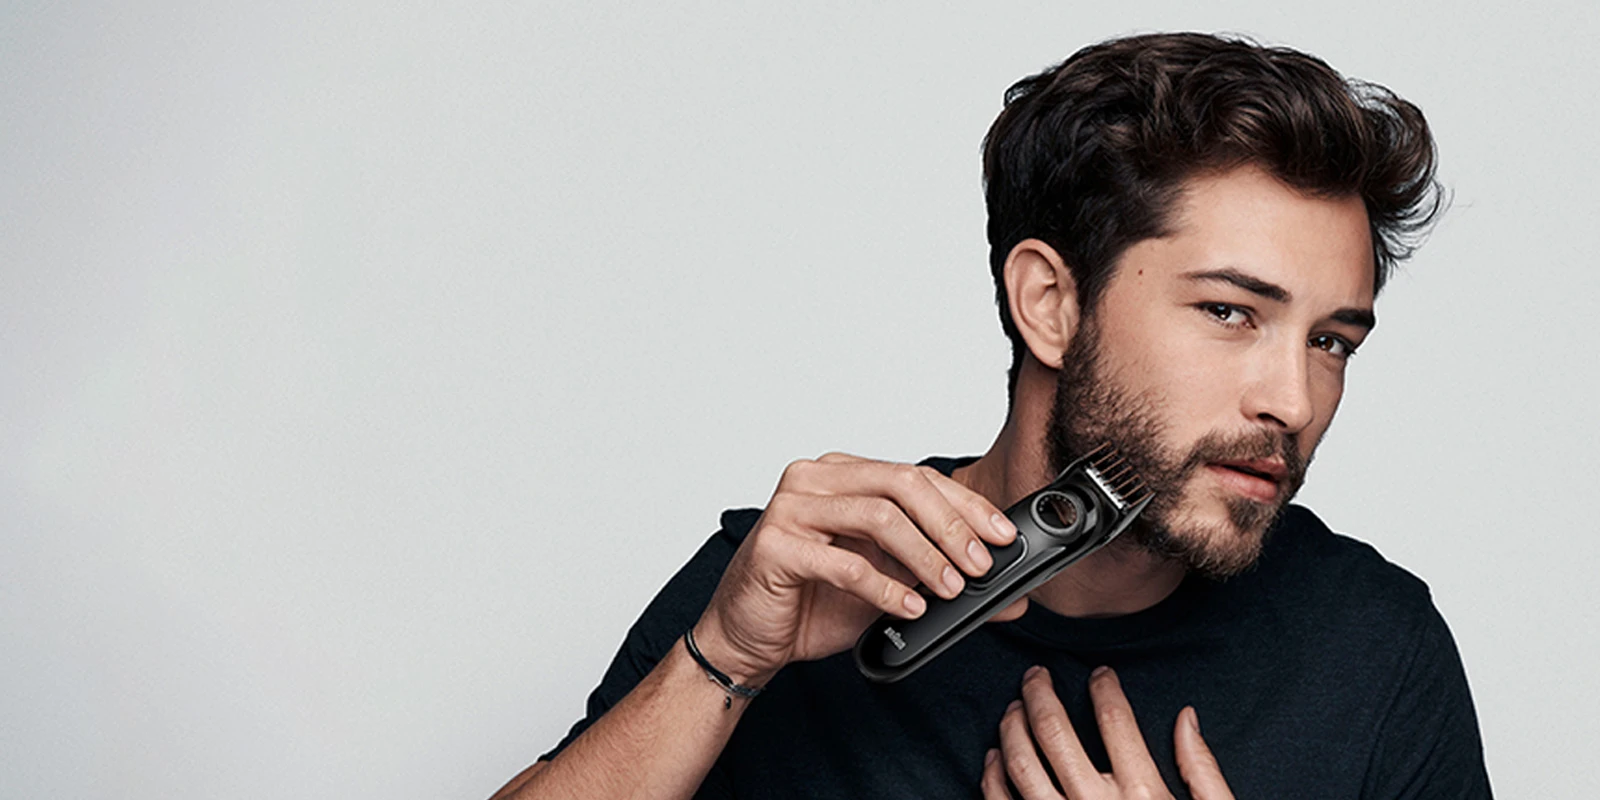  How to choose the best beard trimmer for your needs?